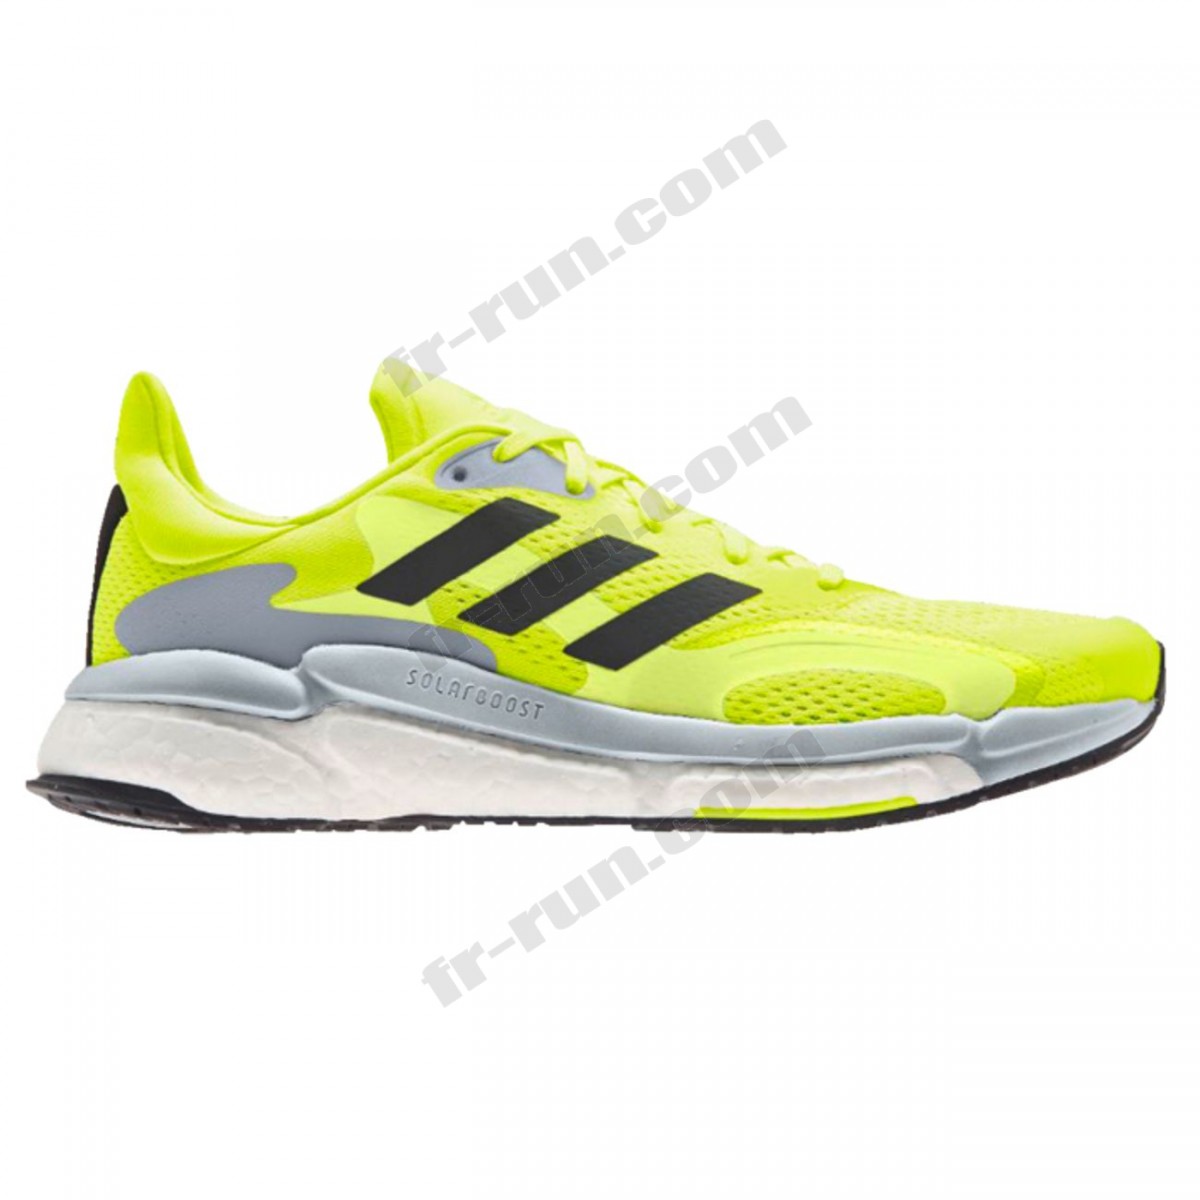 Adidas/CHAUSSURES BASSES running homme ADIDAS SOLAR BOOST 21 M √ Nouveau style √ Soldes - -0